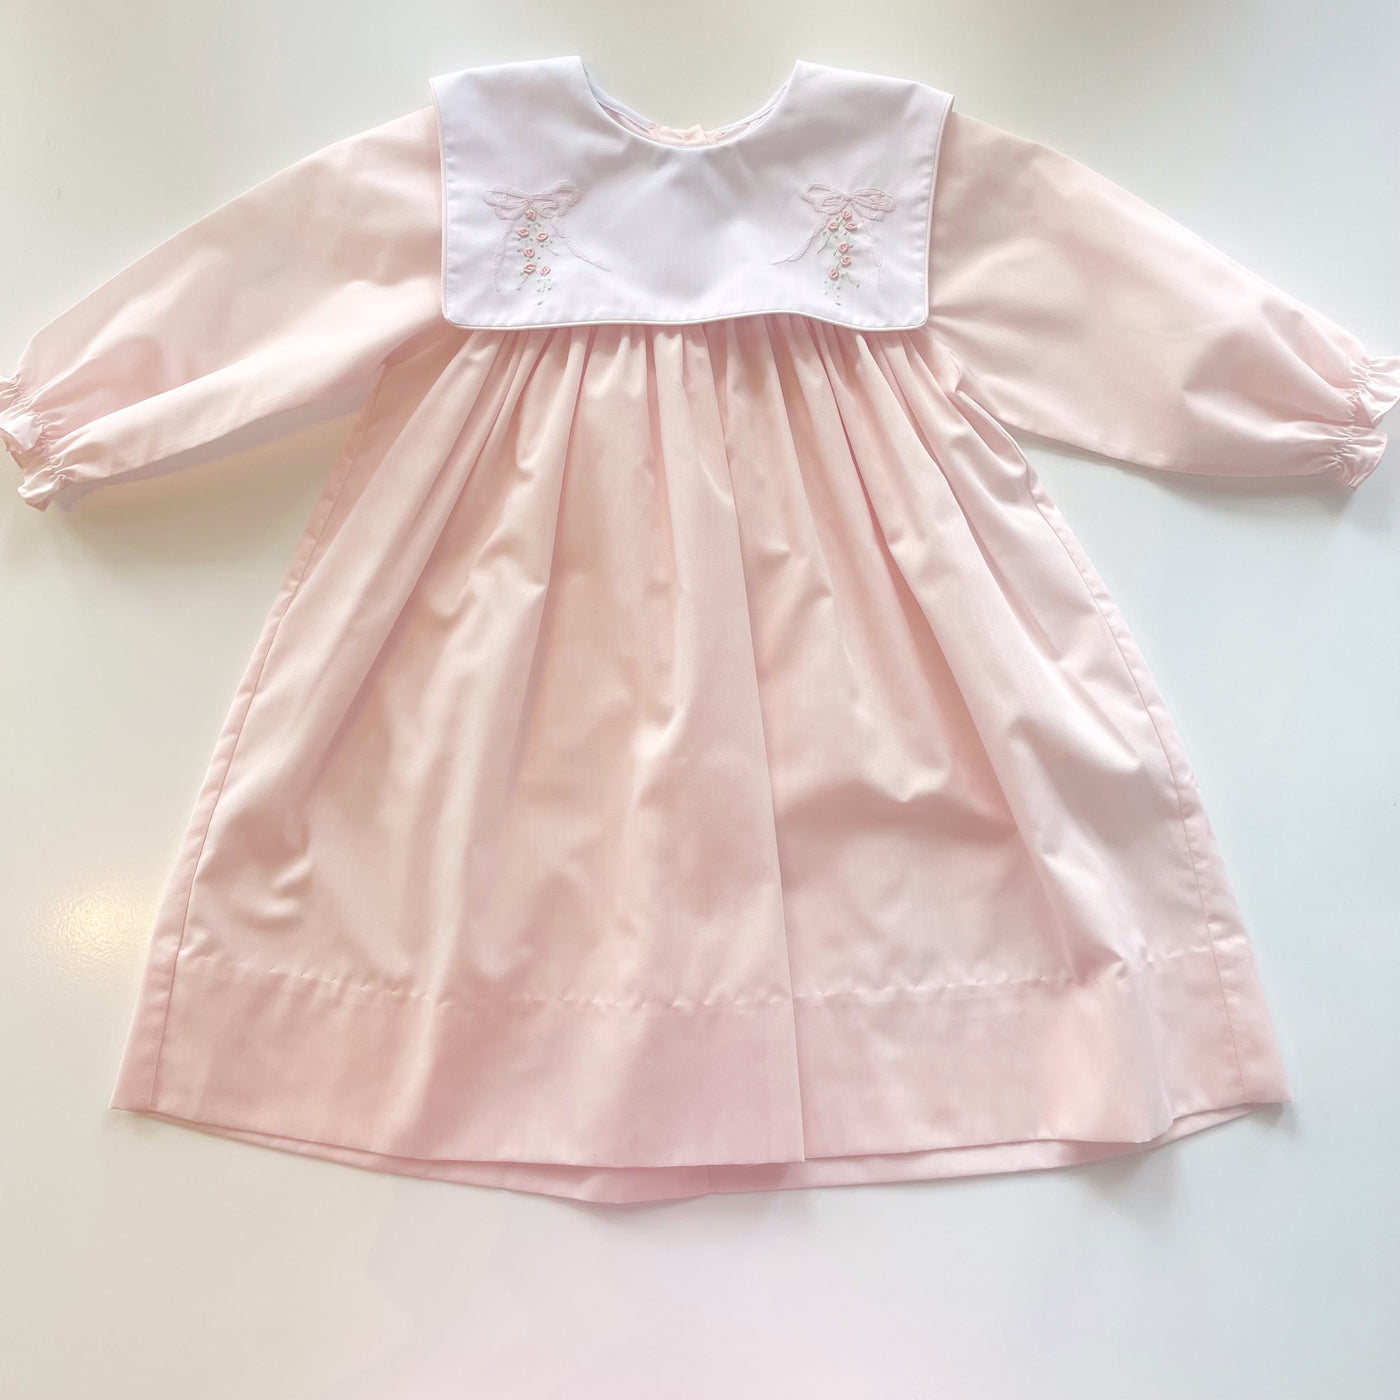 Bow Daygown - White/Pink